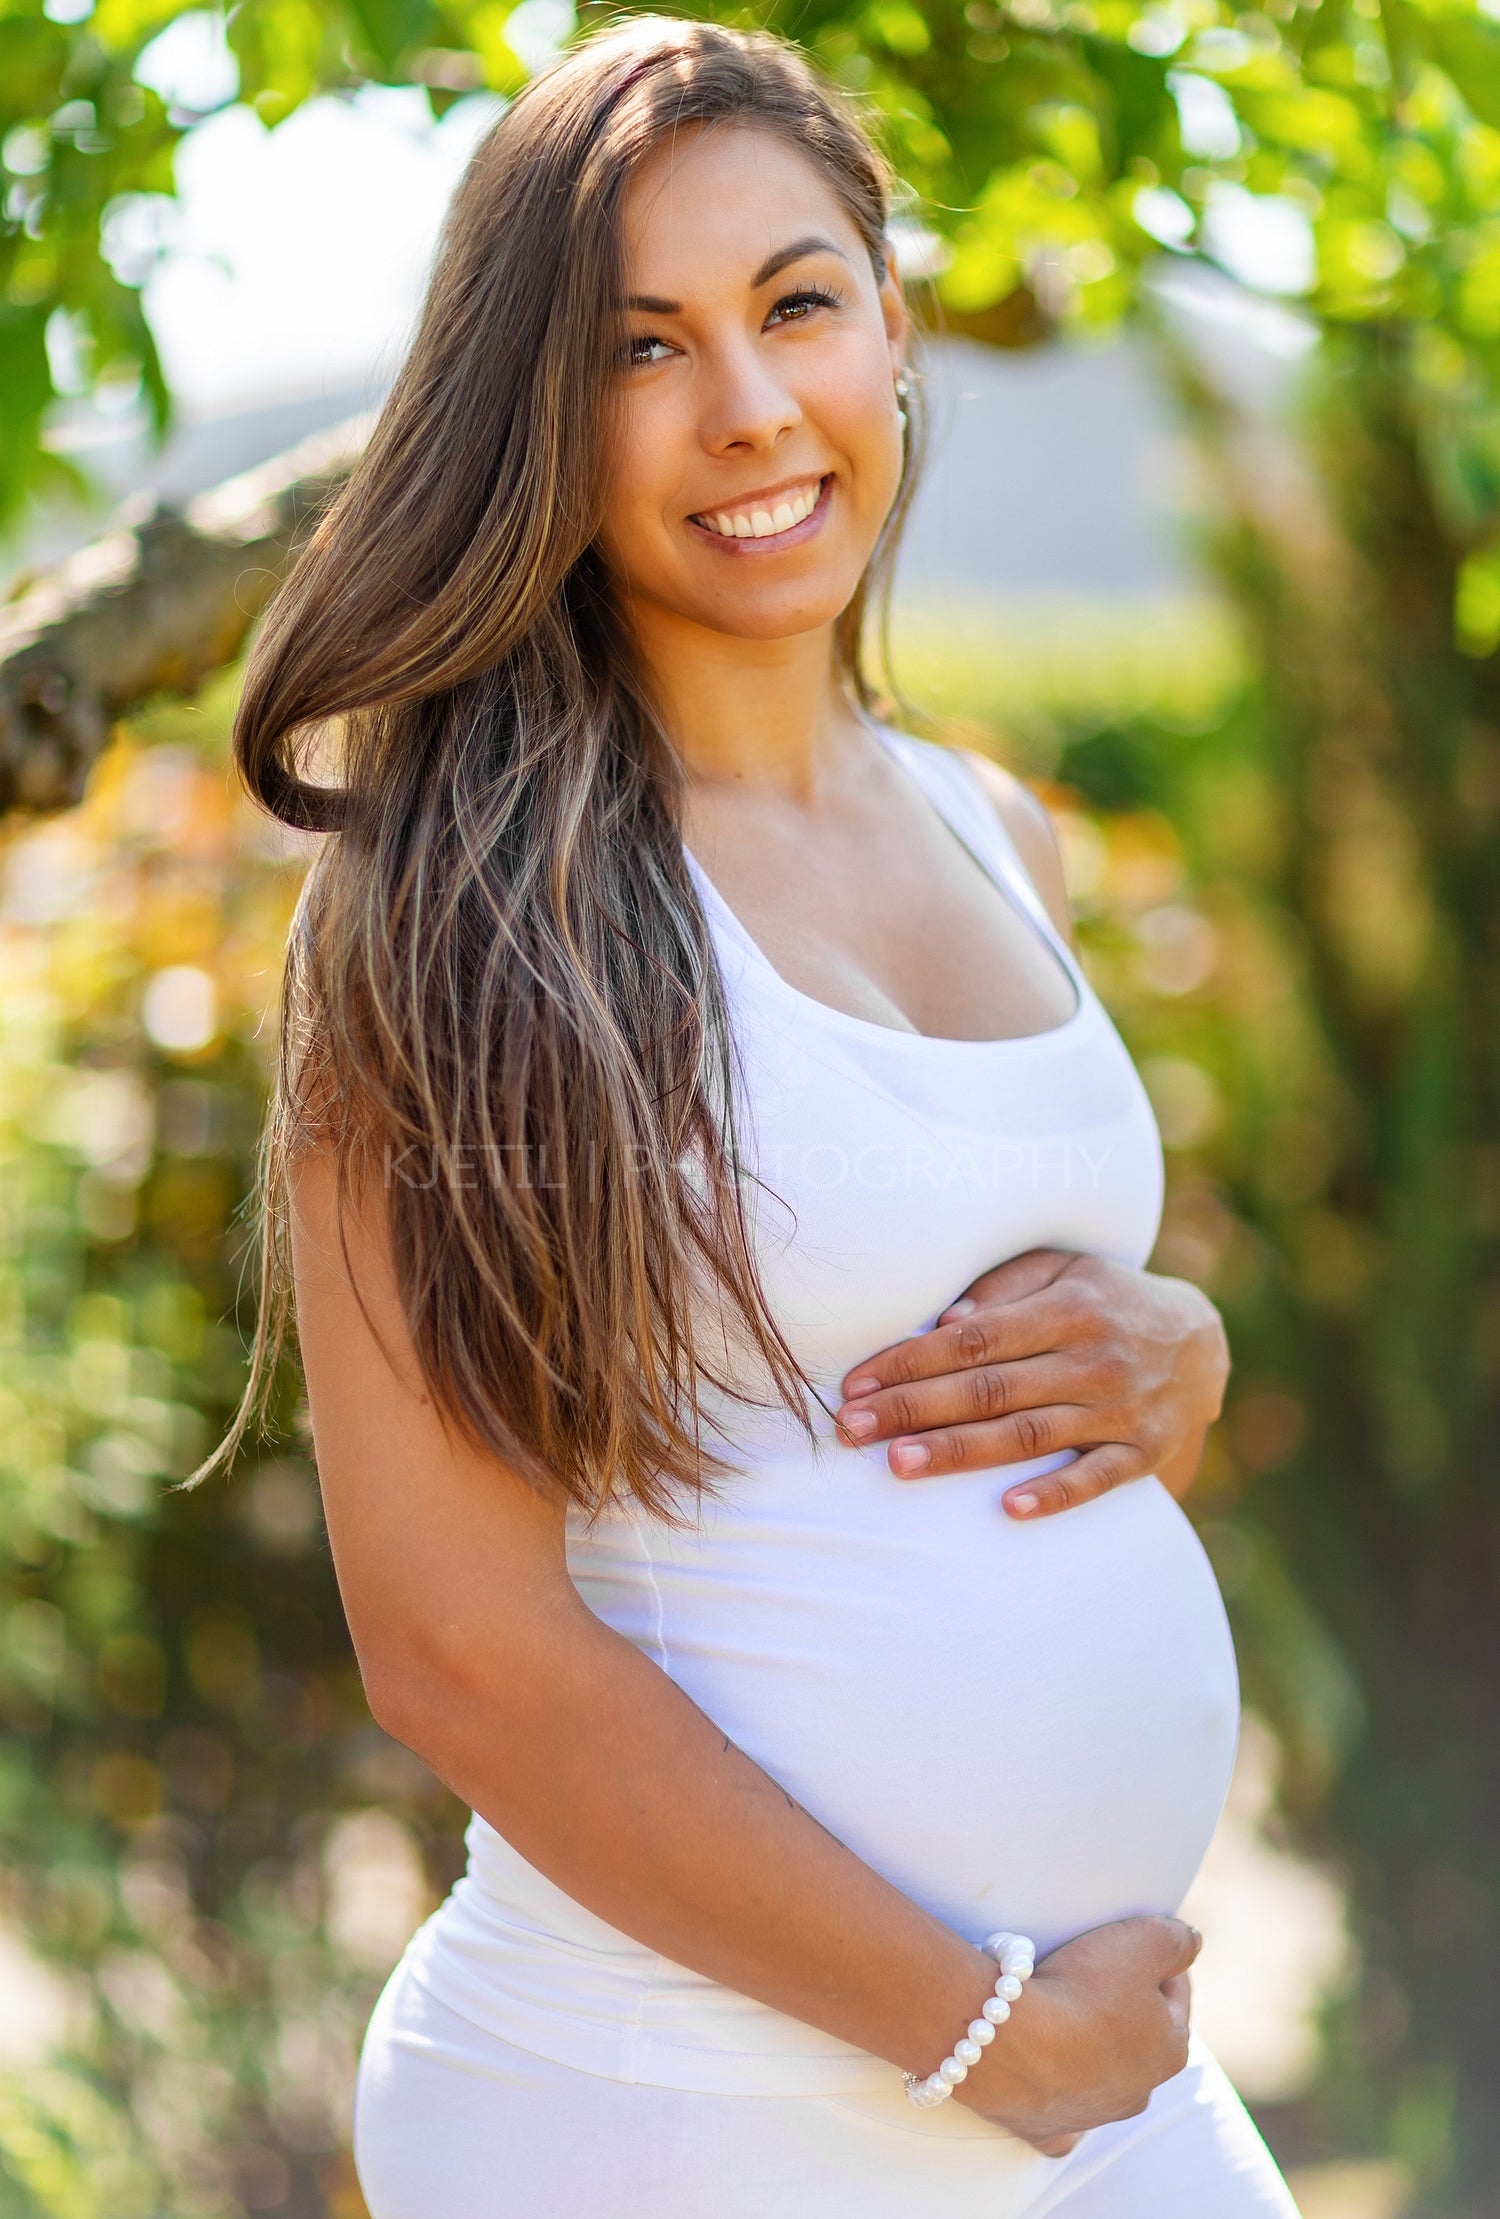 Smiling pregnant woman standing in garden holding hands on belly